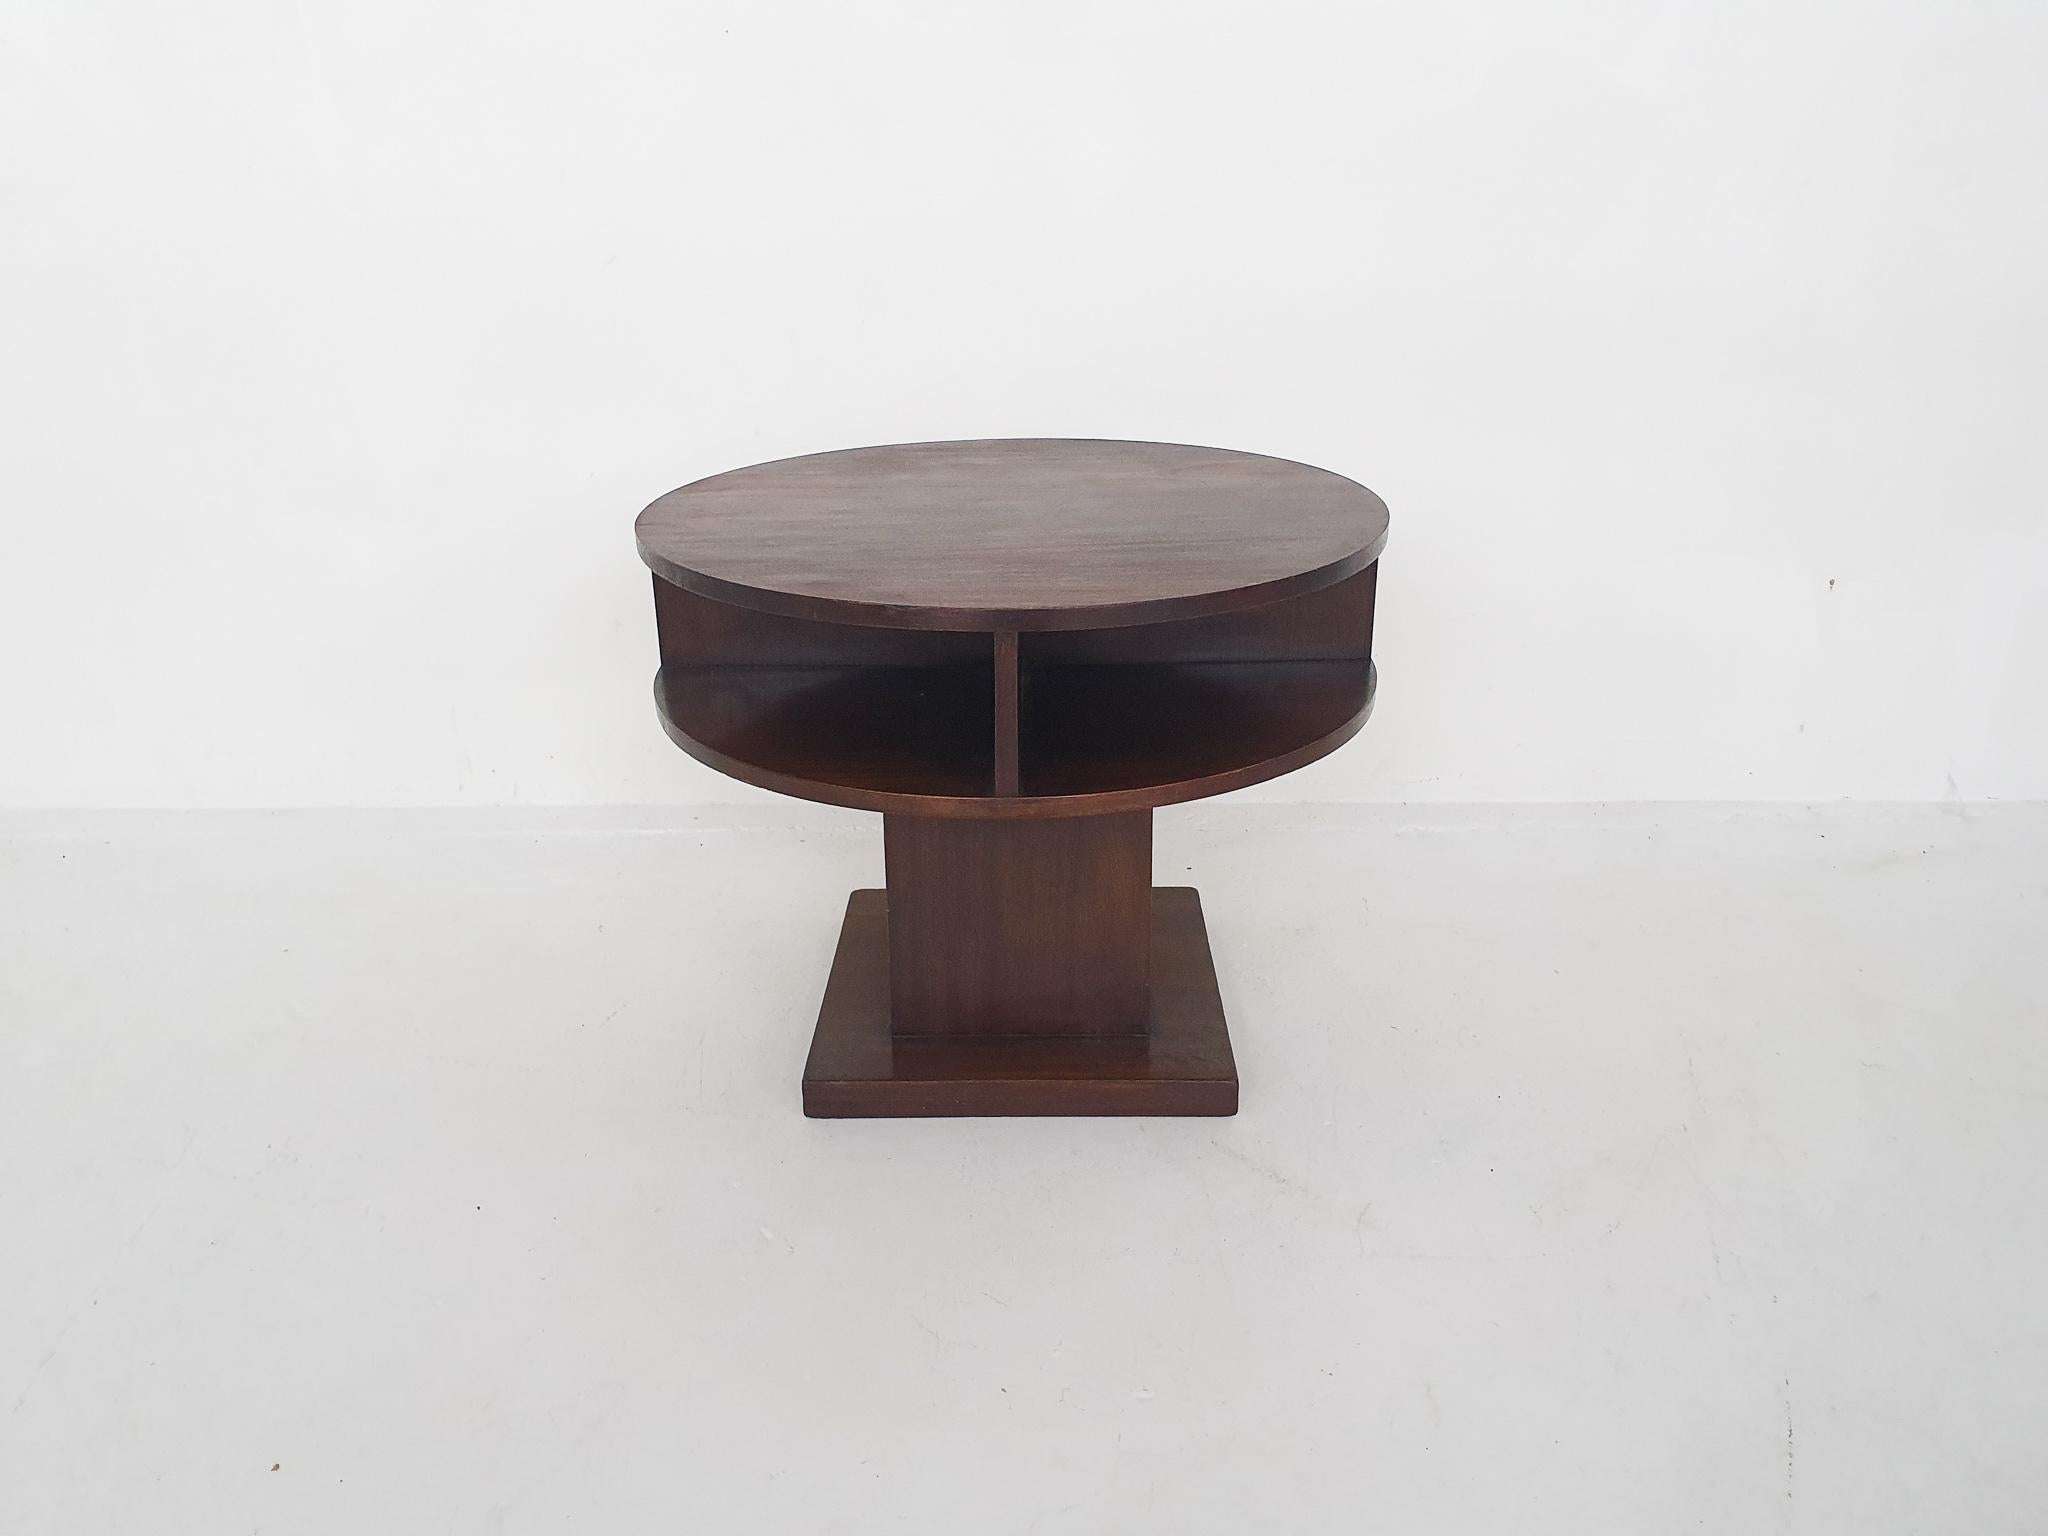 Art Deco Round Mahogany Side Table, The Netherlands 1930's For Sale 1